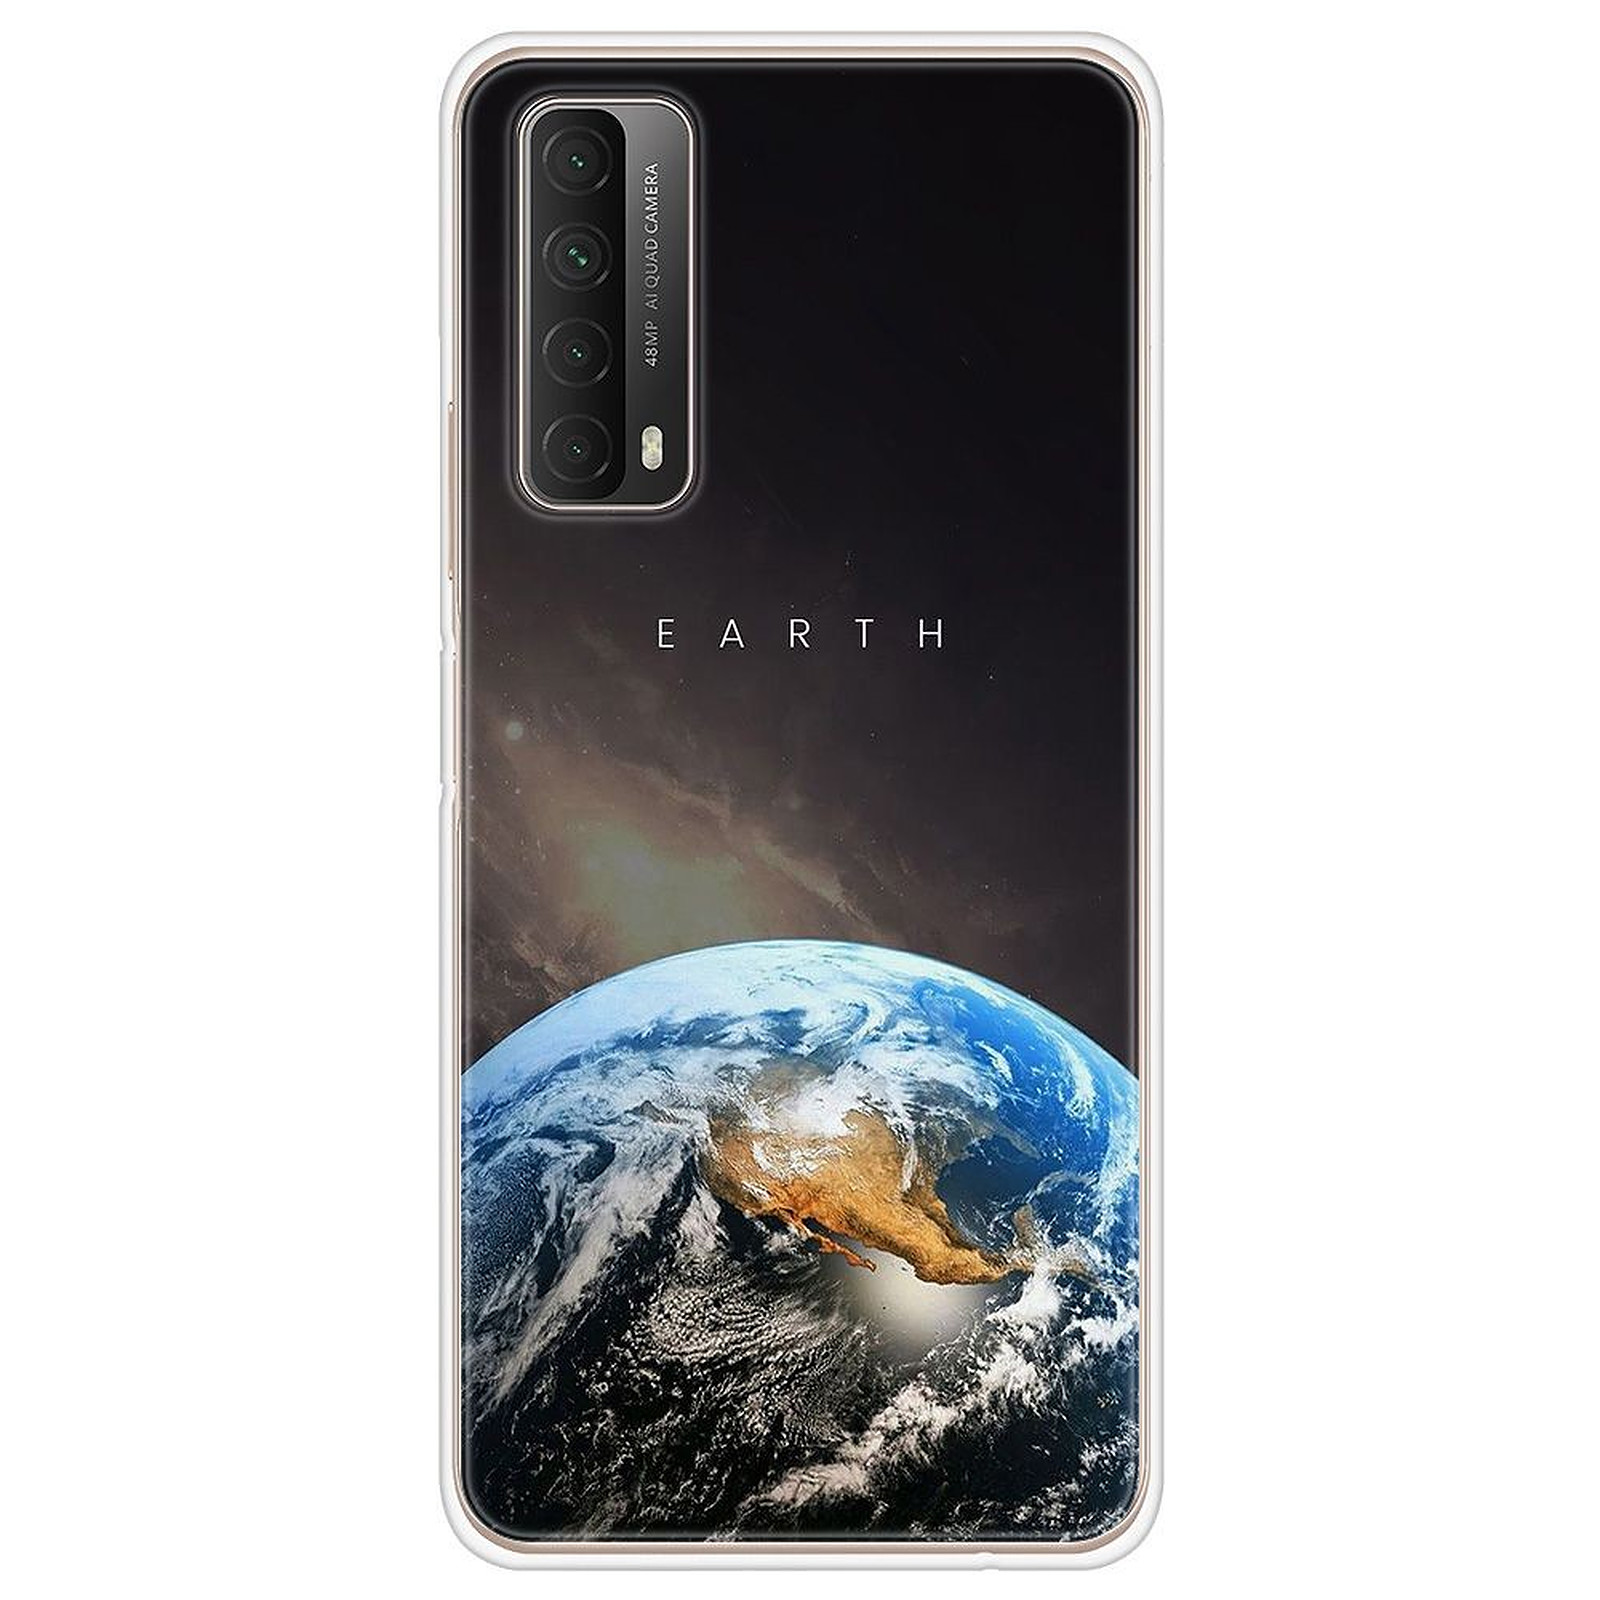 1001 Coques Coque silicone gel Huawei P Smart 2021 motif Earth - Coque telephone 1001Coques